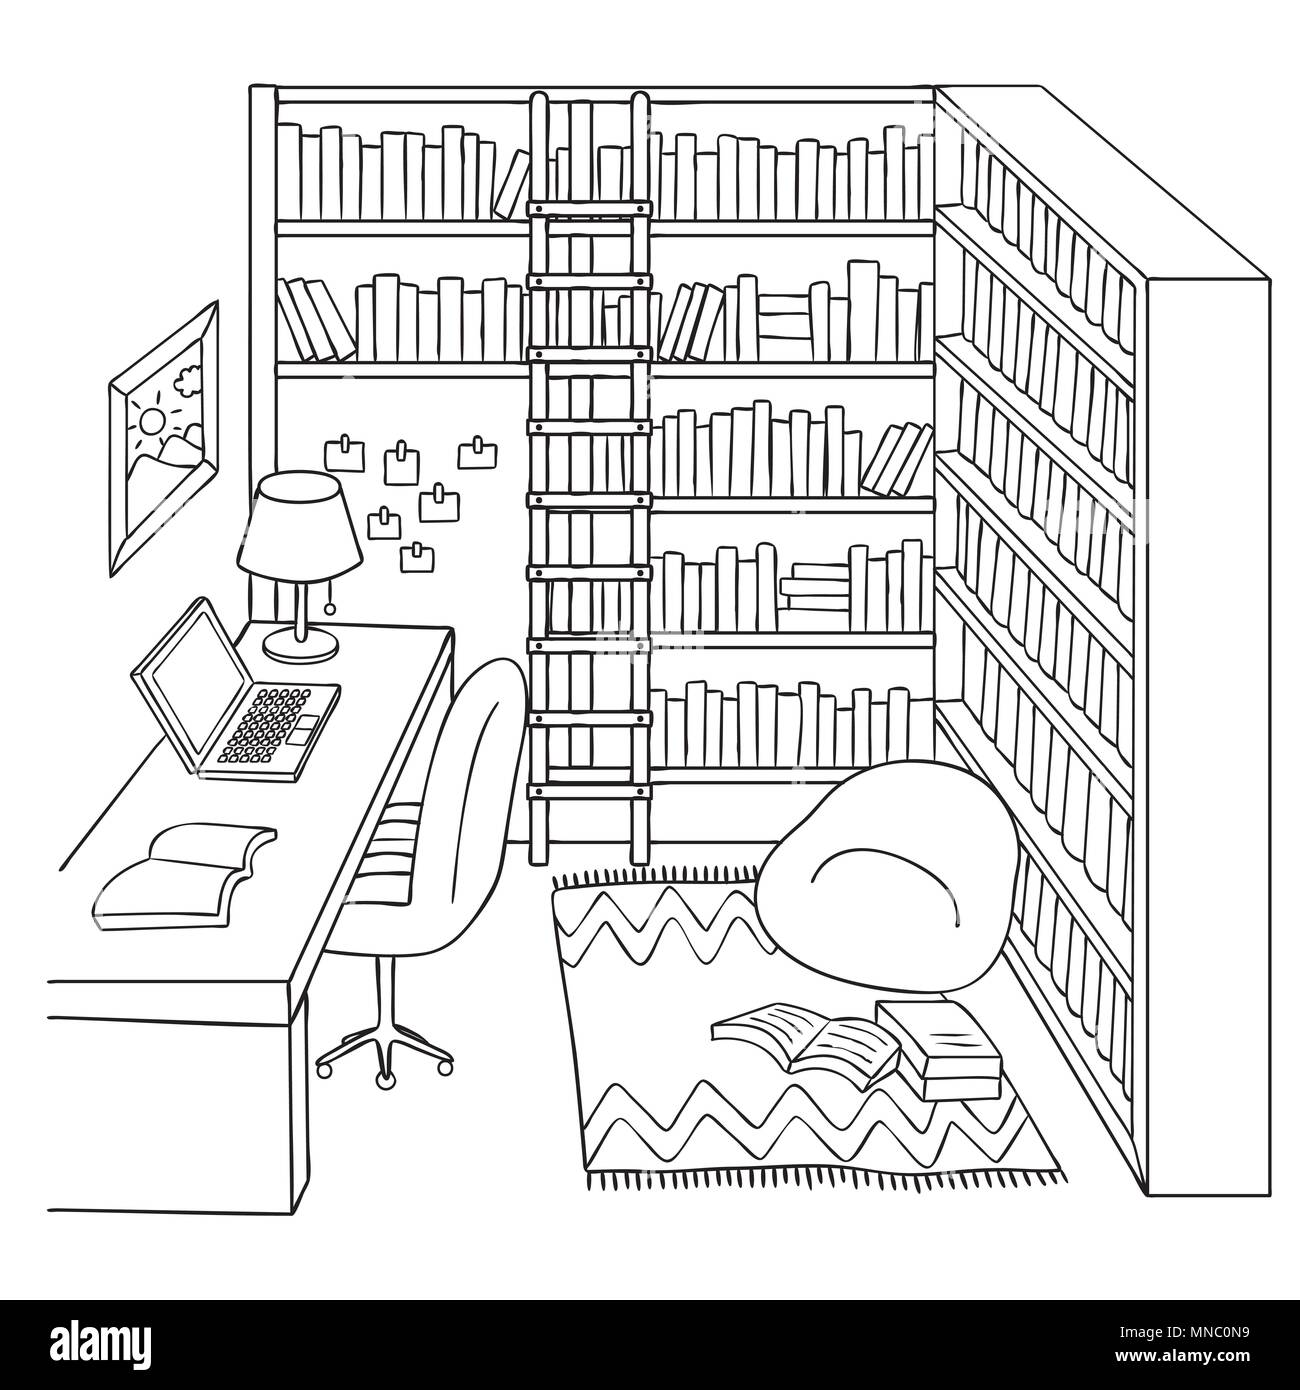 Hand drawn study or library room for design element and coloring book page. Vector illustration. Stock Vector